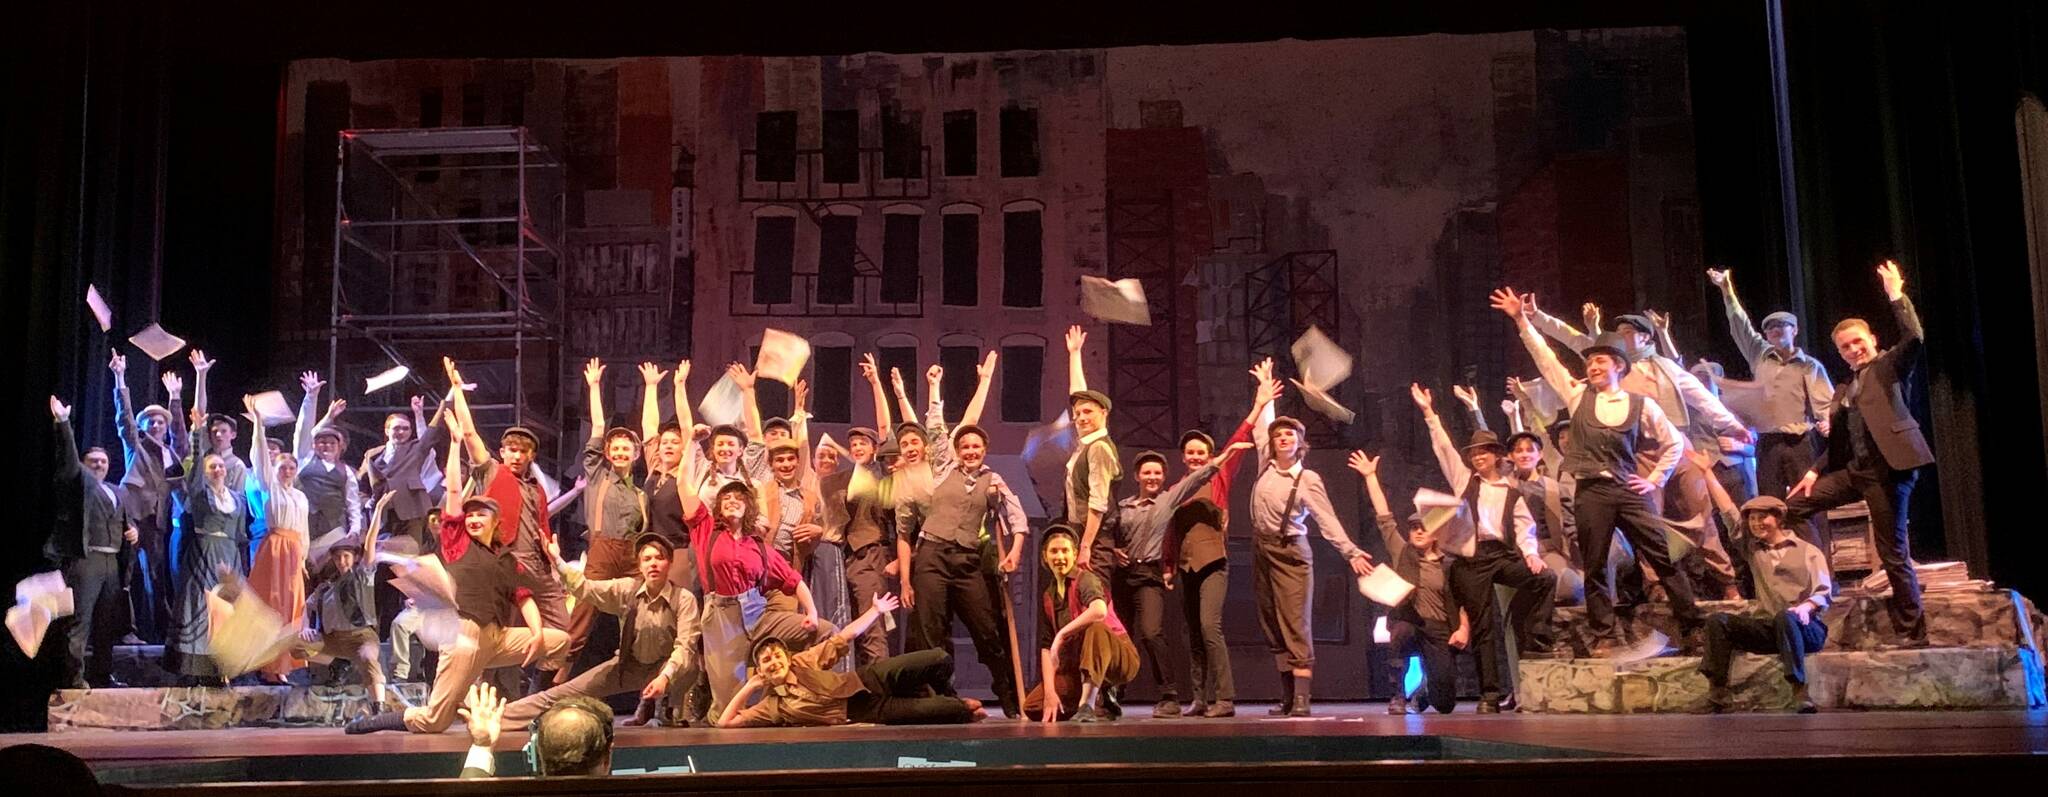 Homer High School Concert Choir presented Disney’s “Newsies: The Musical” on March 24, at the Mariner Theater. (Photo by Christina Whiting/Homer News)